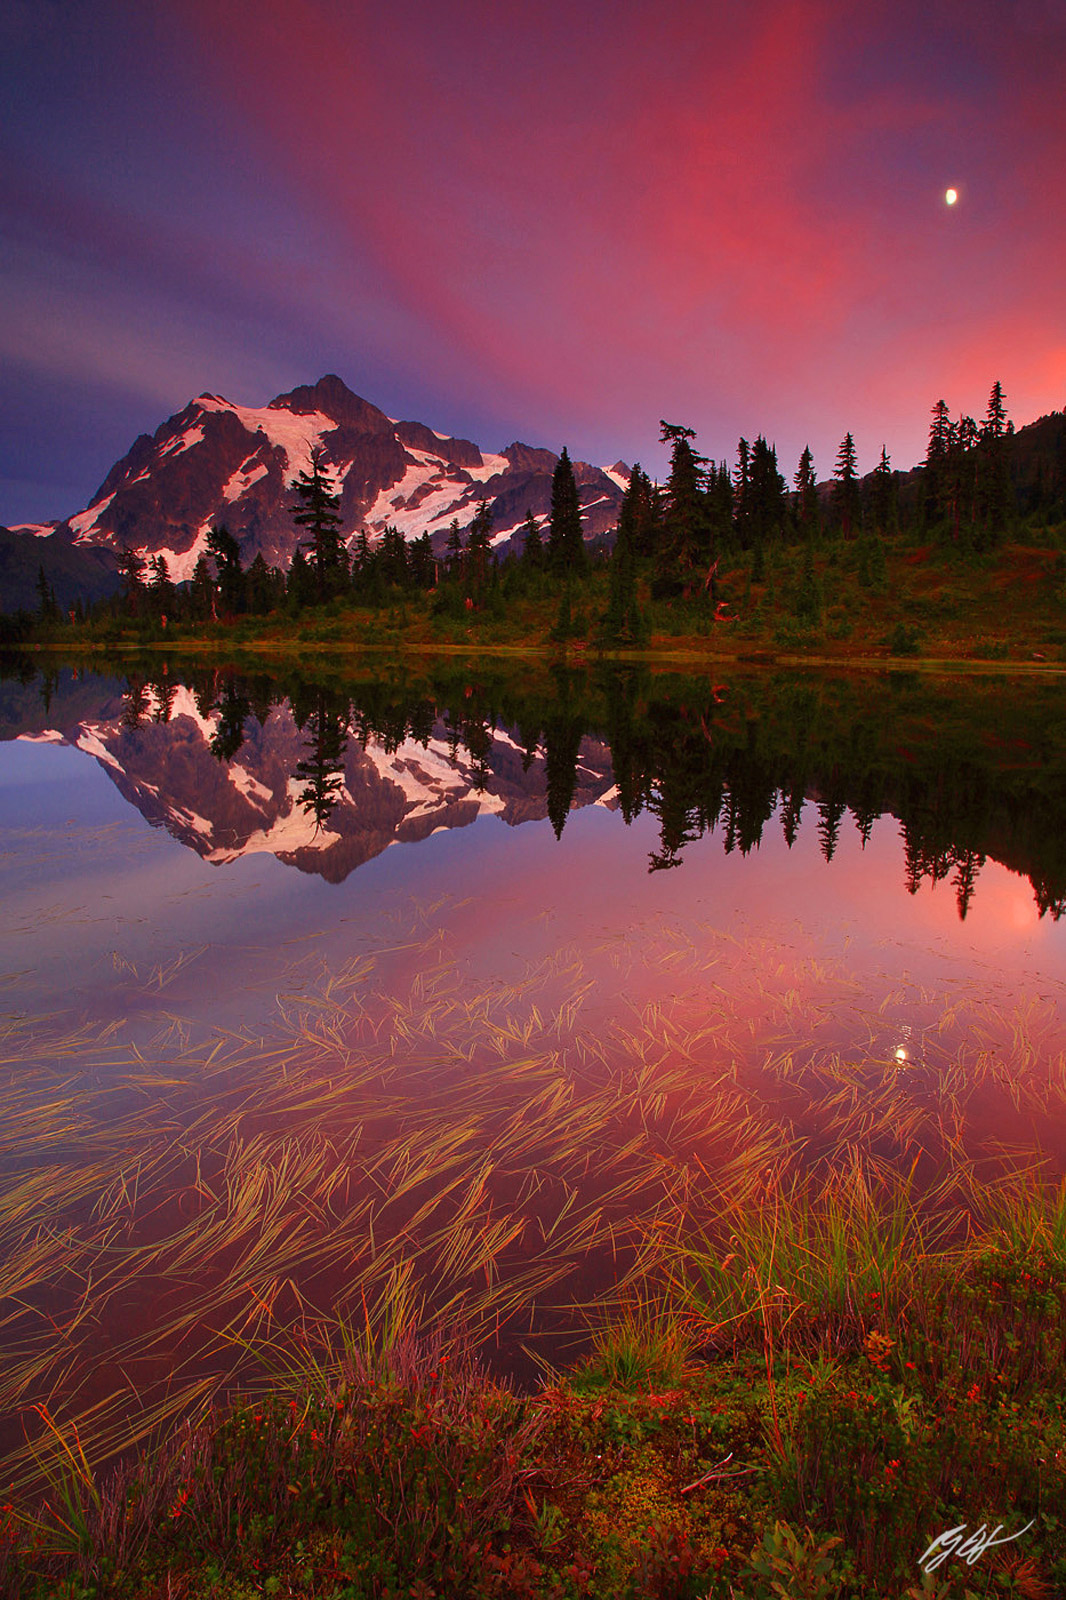 Sunset Mt Shuksan Reflected in Picture Lake from Heather Meadows in the Mt Baker Recreation Area in Washington